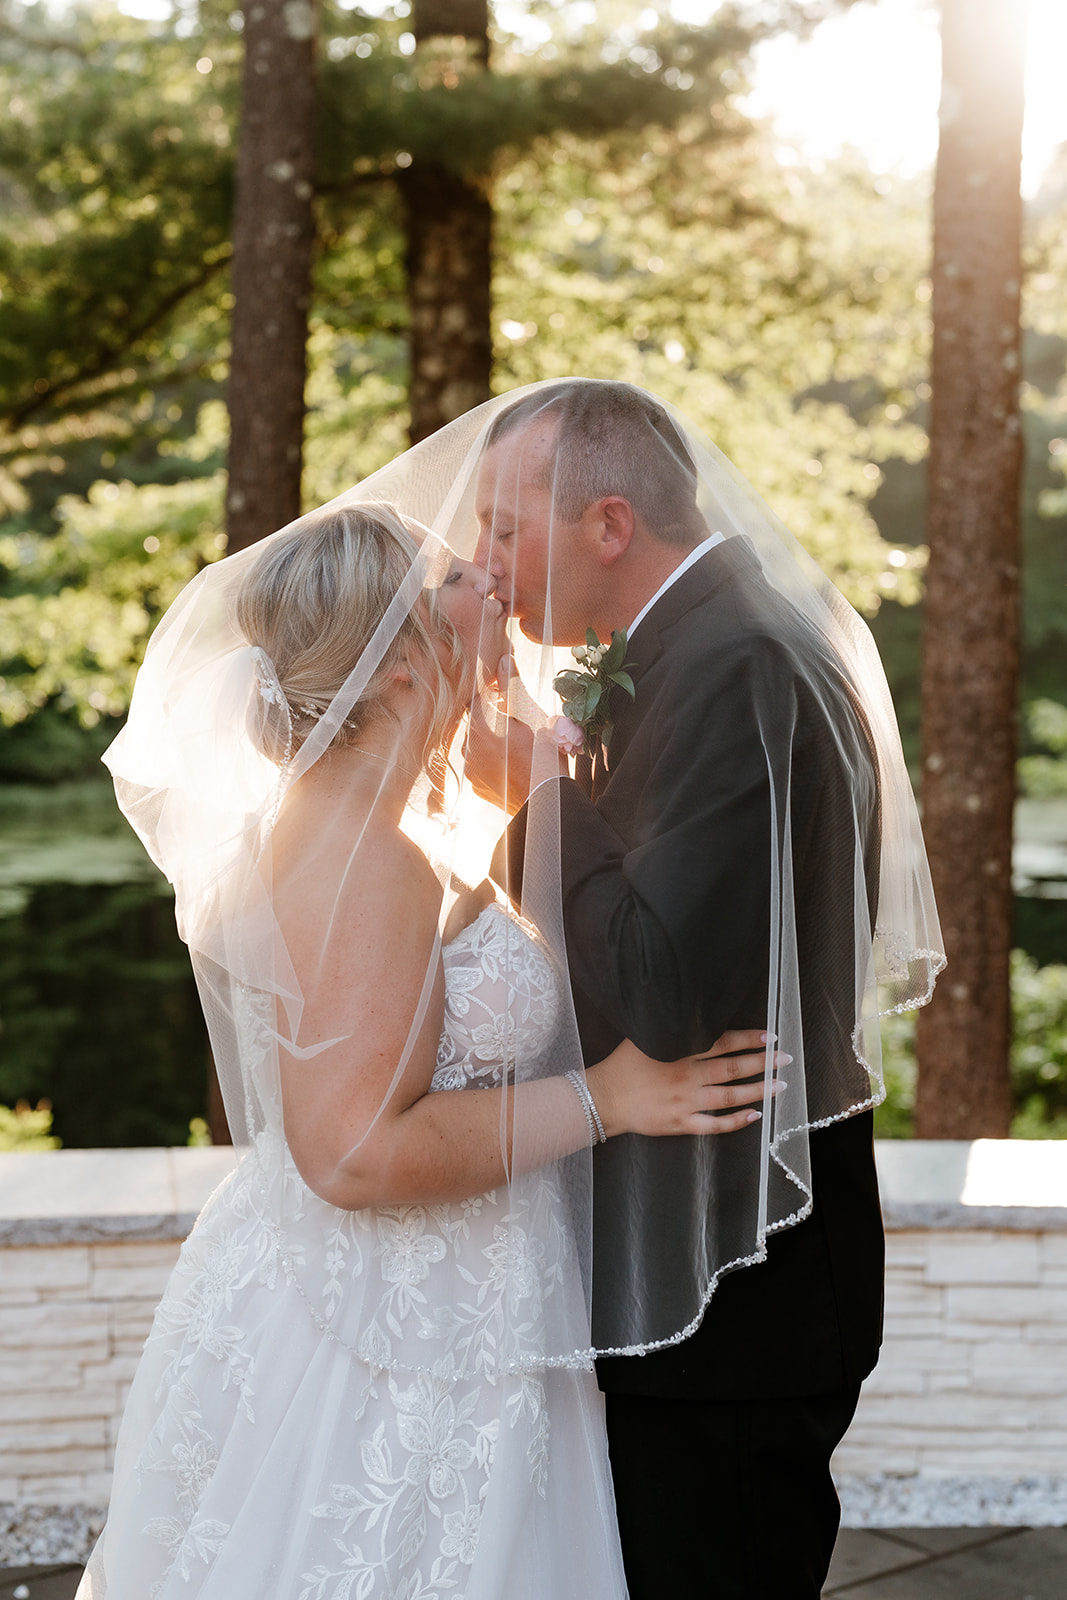 A bride and groom embrace on a sunlit deck surrounded by trees, while kissing